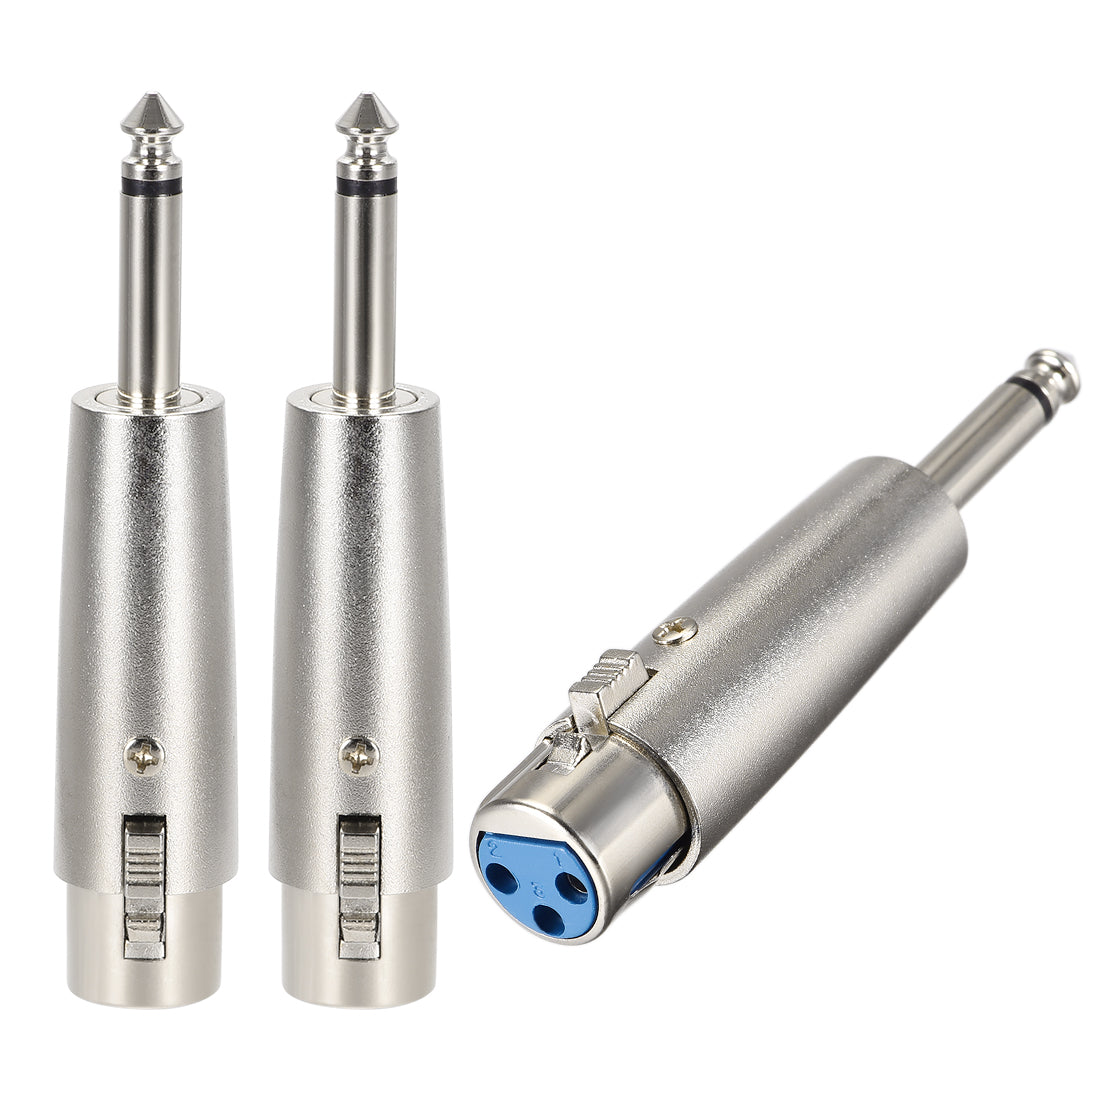 uxcell Uxcell XLR Female to 1/4" Male TRS Adapter,Gender Changer - XLR-F to 6.35mm Mono Coupler	Adapters,Microphones Mono Plug In Audio Connector,Mic Plug 3pcs